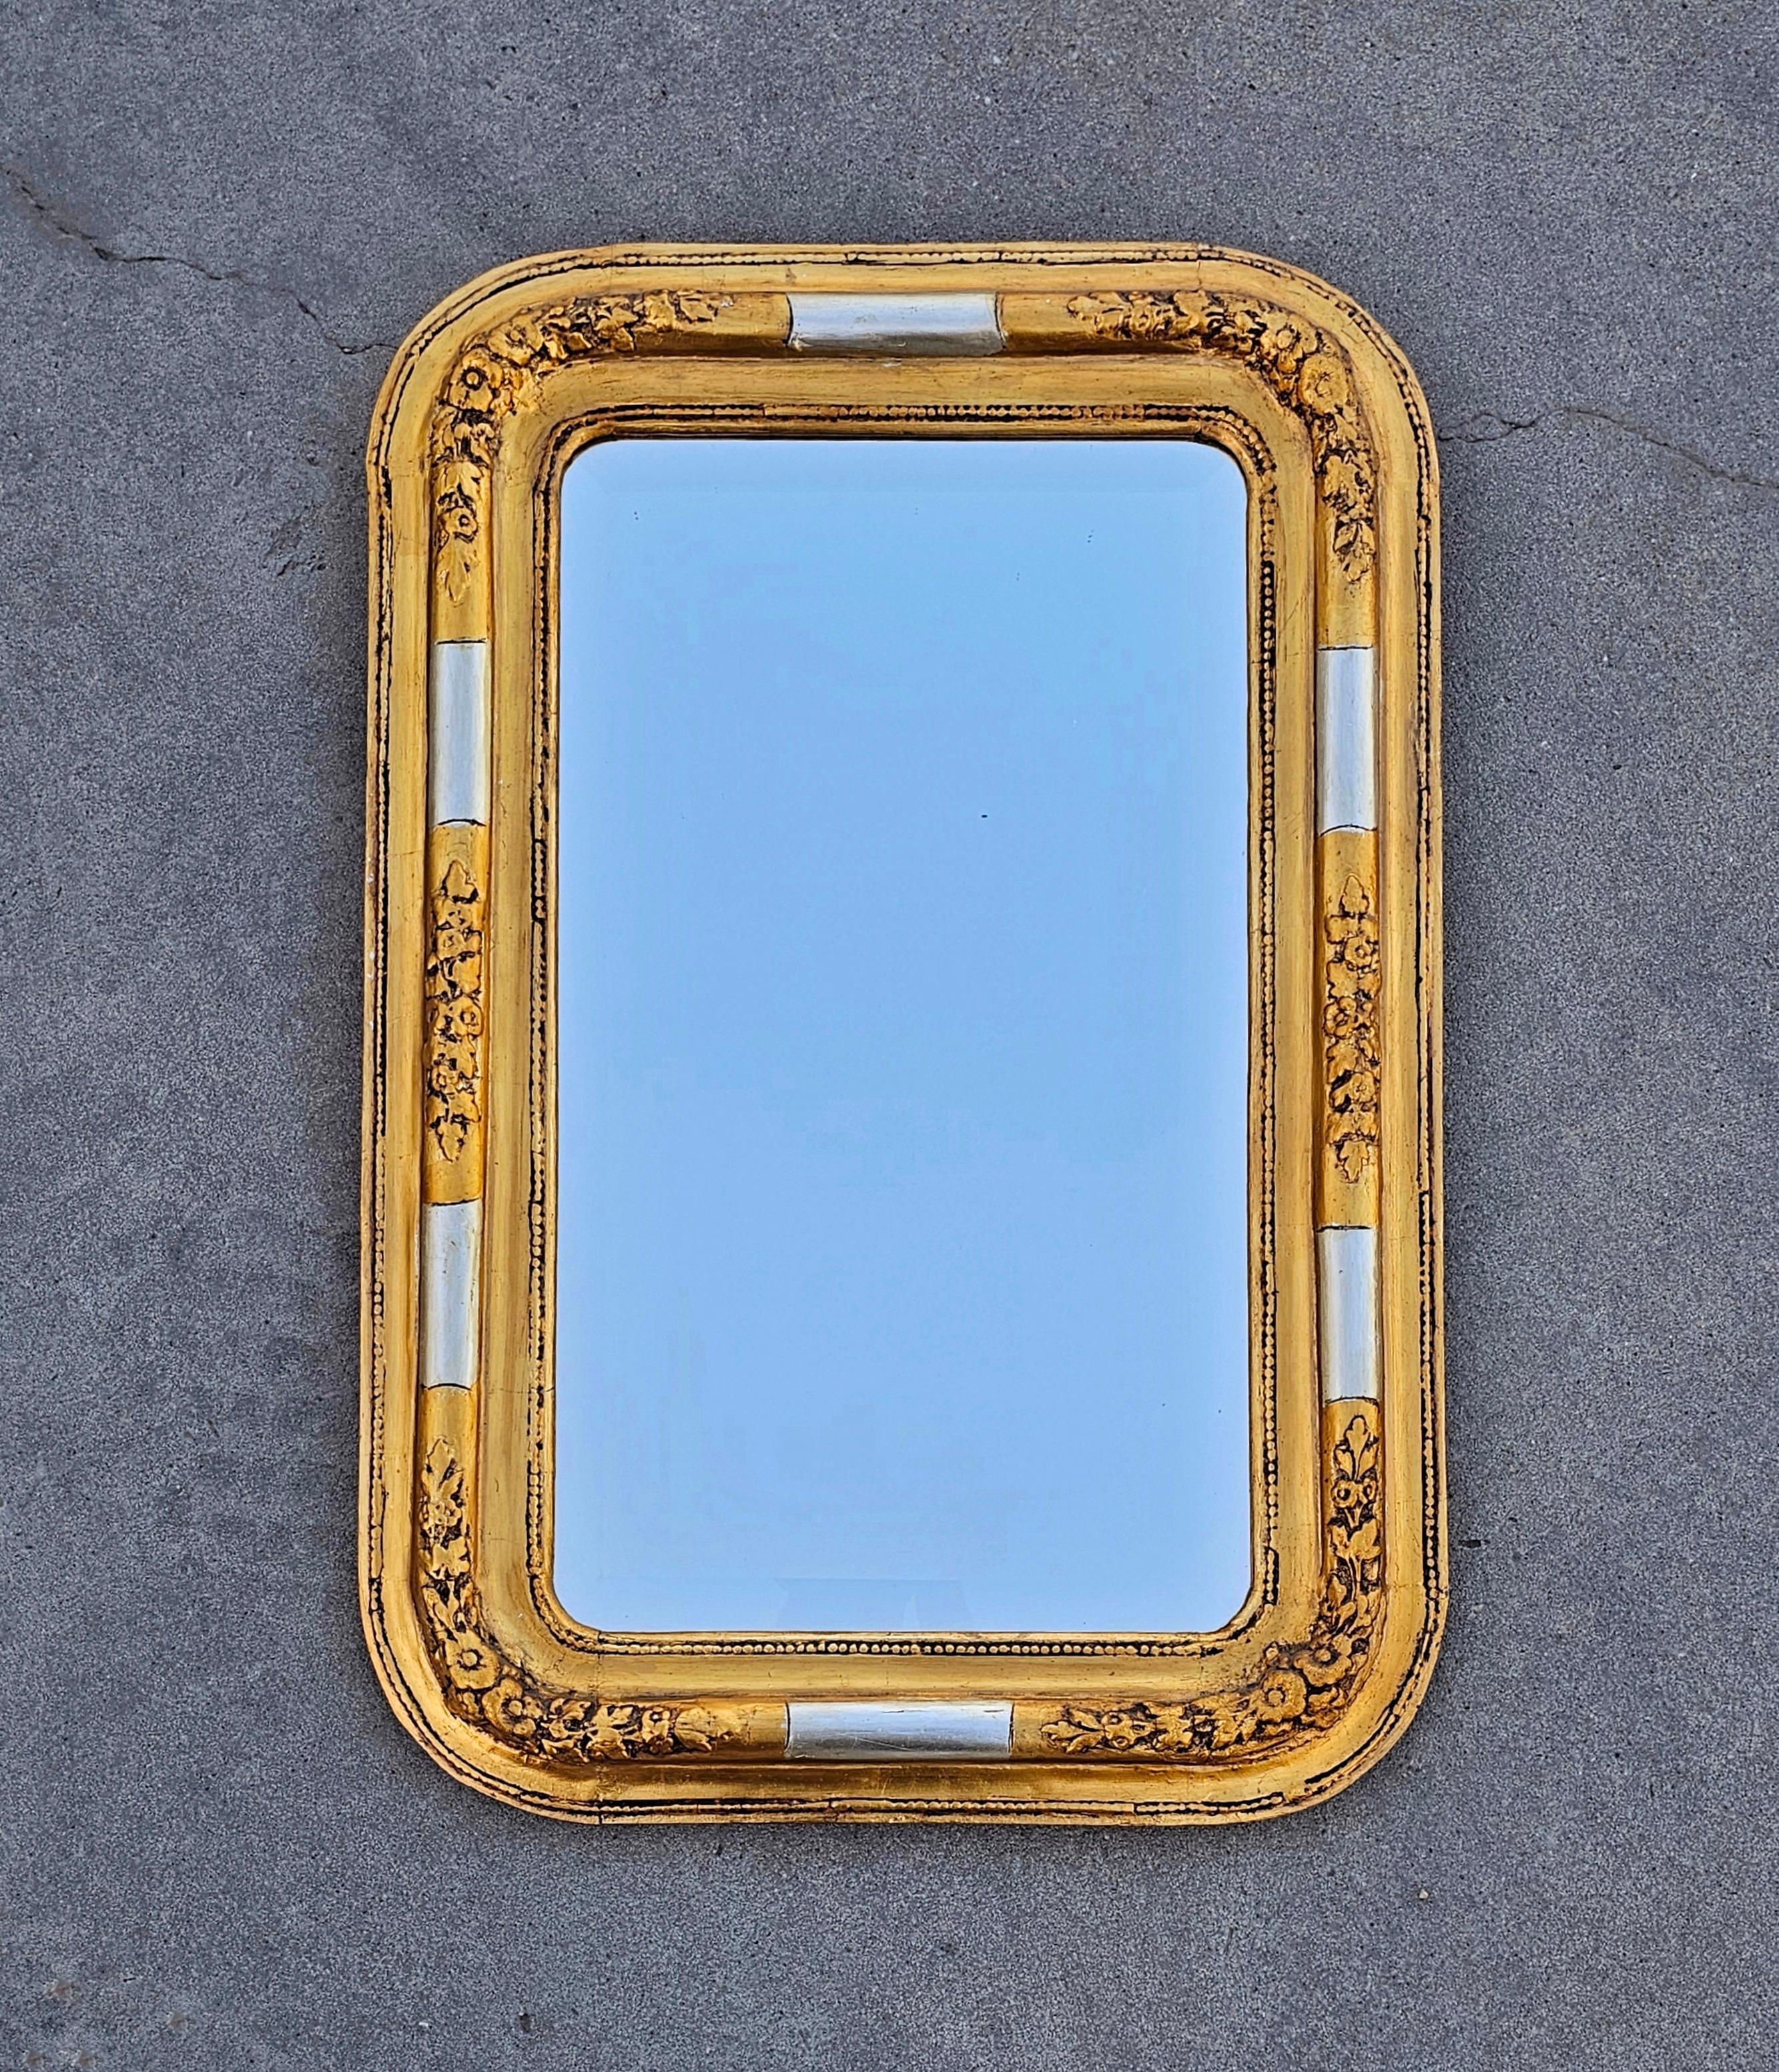 In this listing you will find a gorgeous, large and rare Biedermeier Mirror with gilt wood frame and faceted mirror glass. It features a rectangular shape with rounded corners and floral decorative carvings. The mirror is faceted. Made in Austria